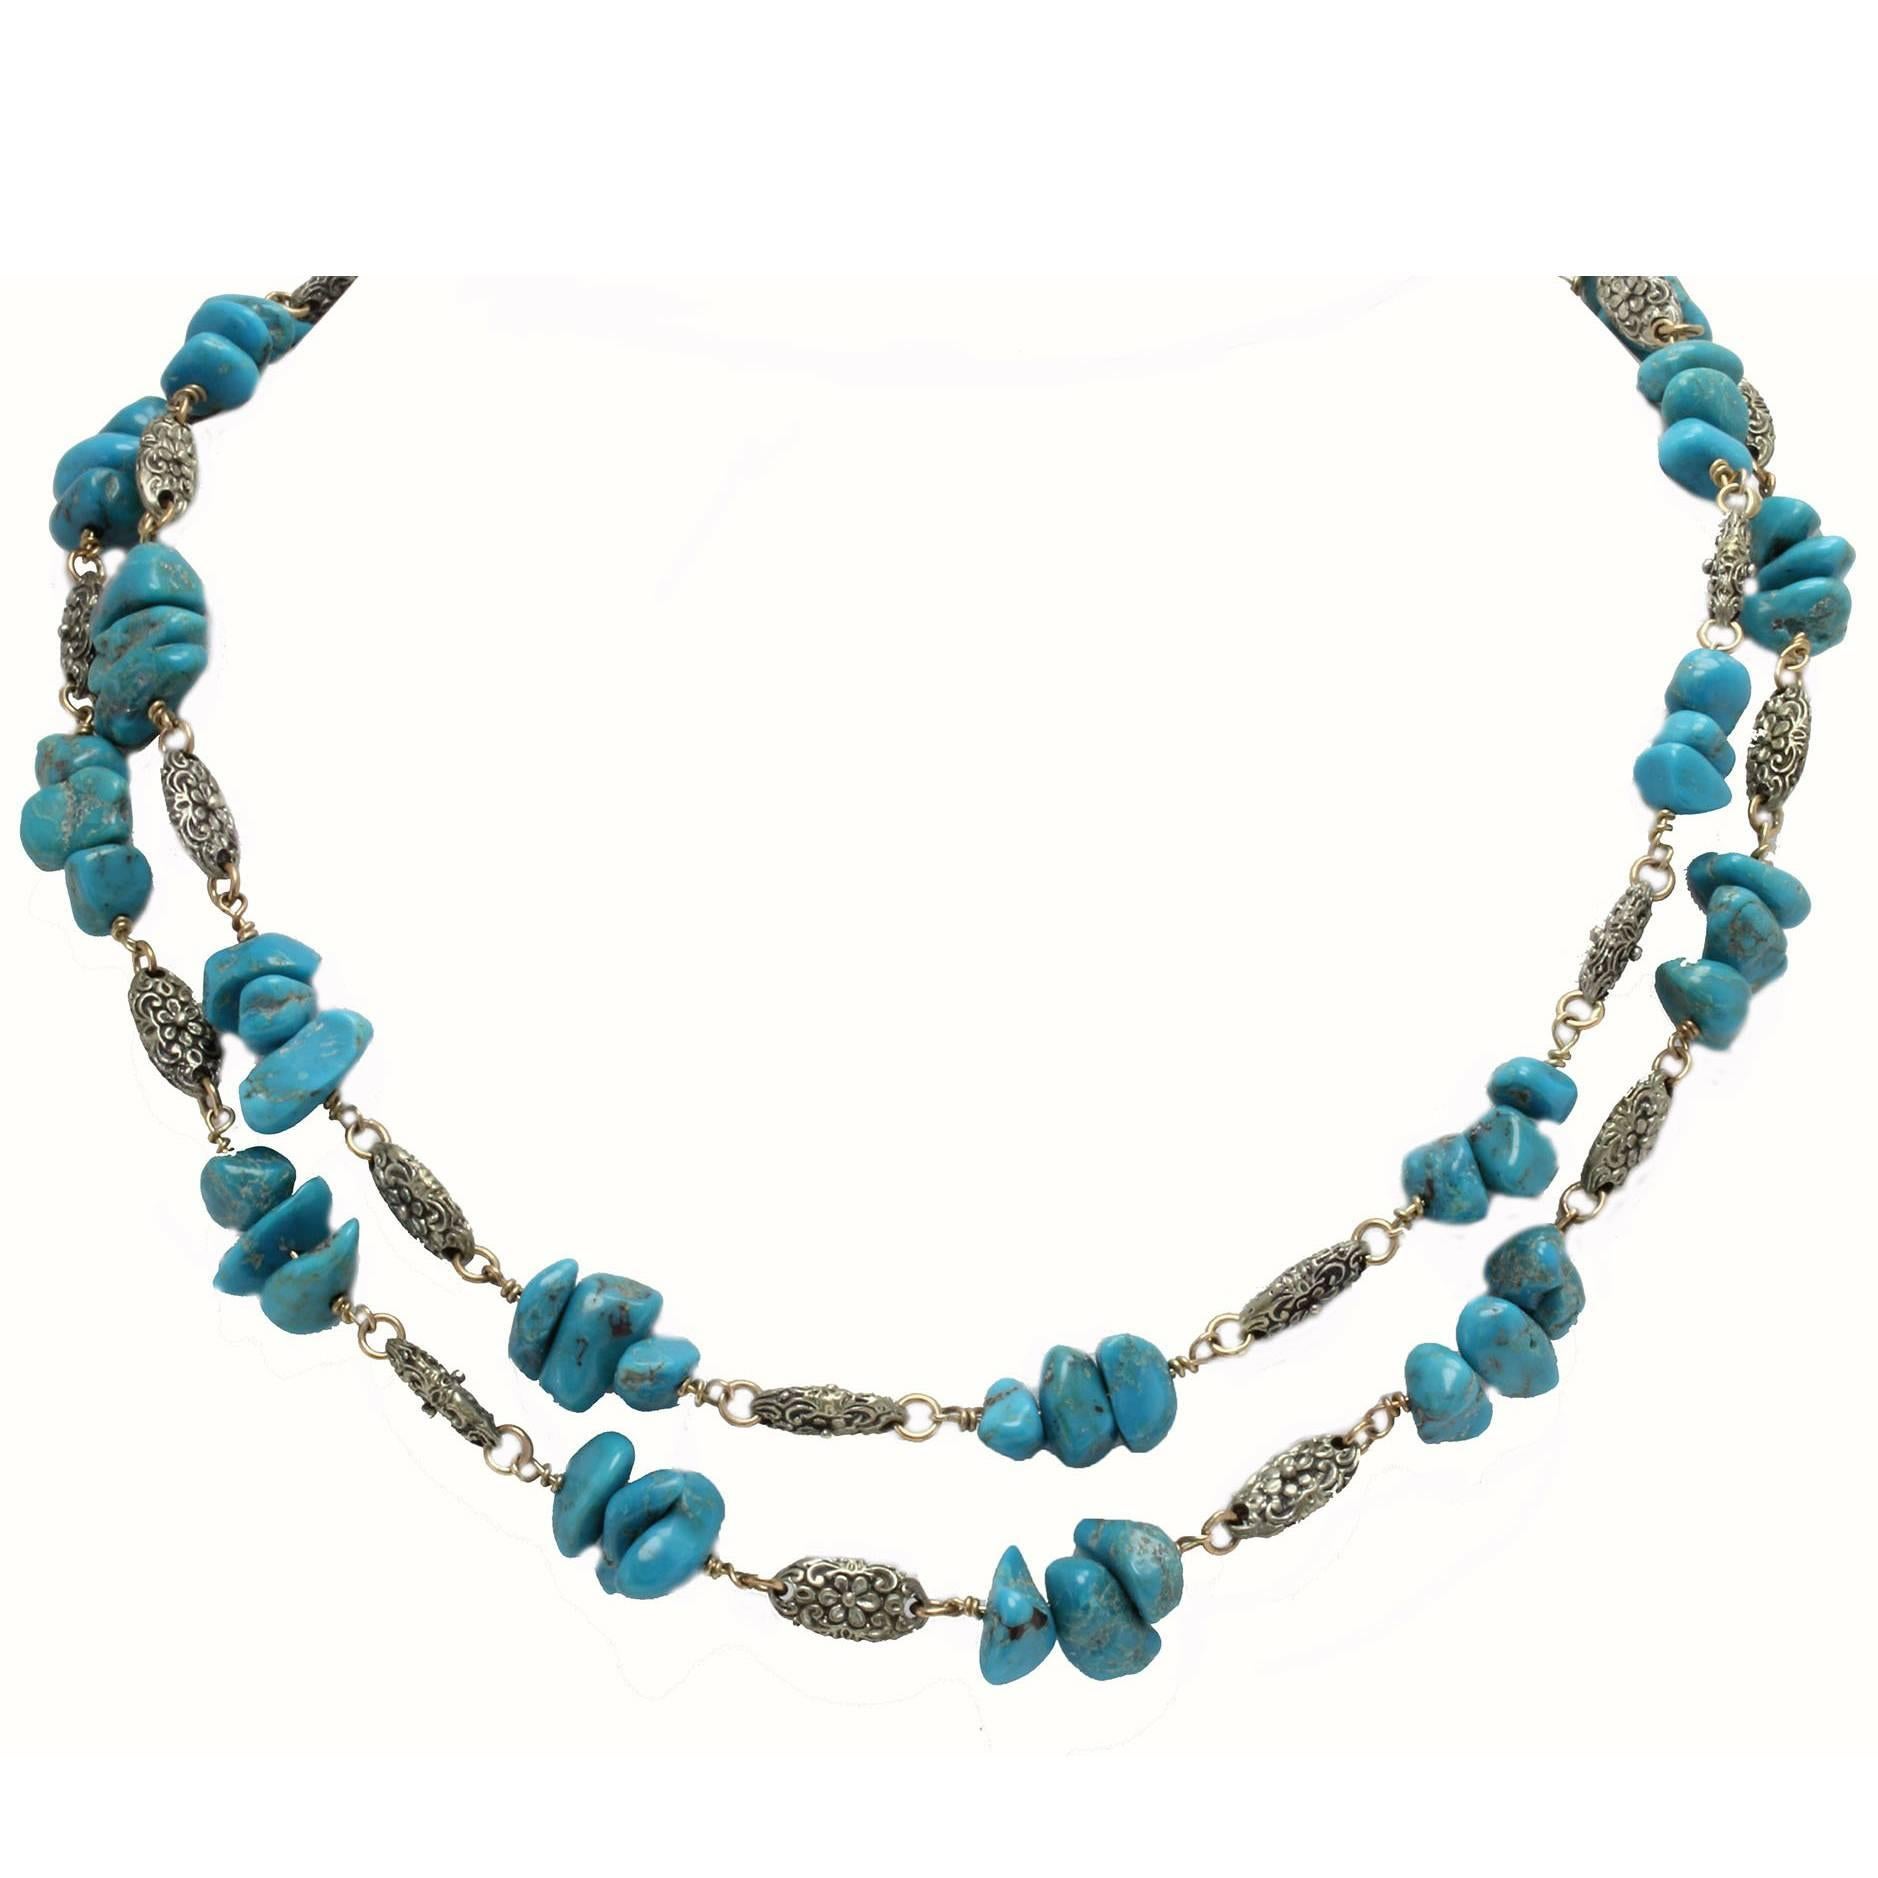  Turquoise Necklace